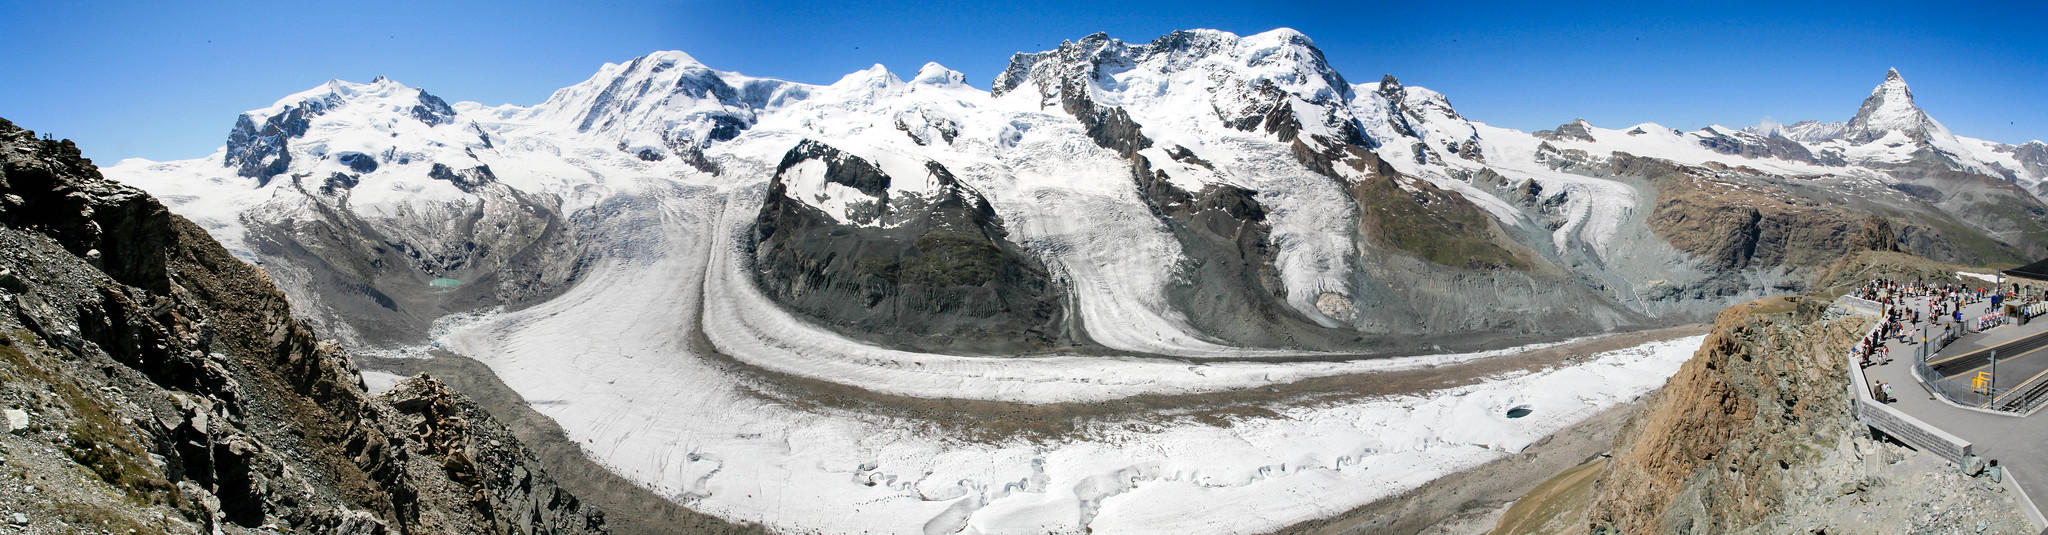 Looking down on the Gorner glacier, in 2009